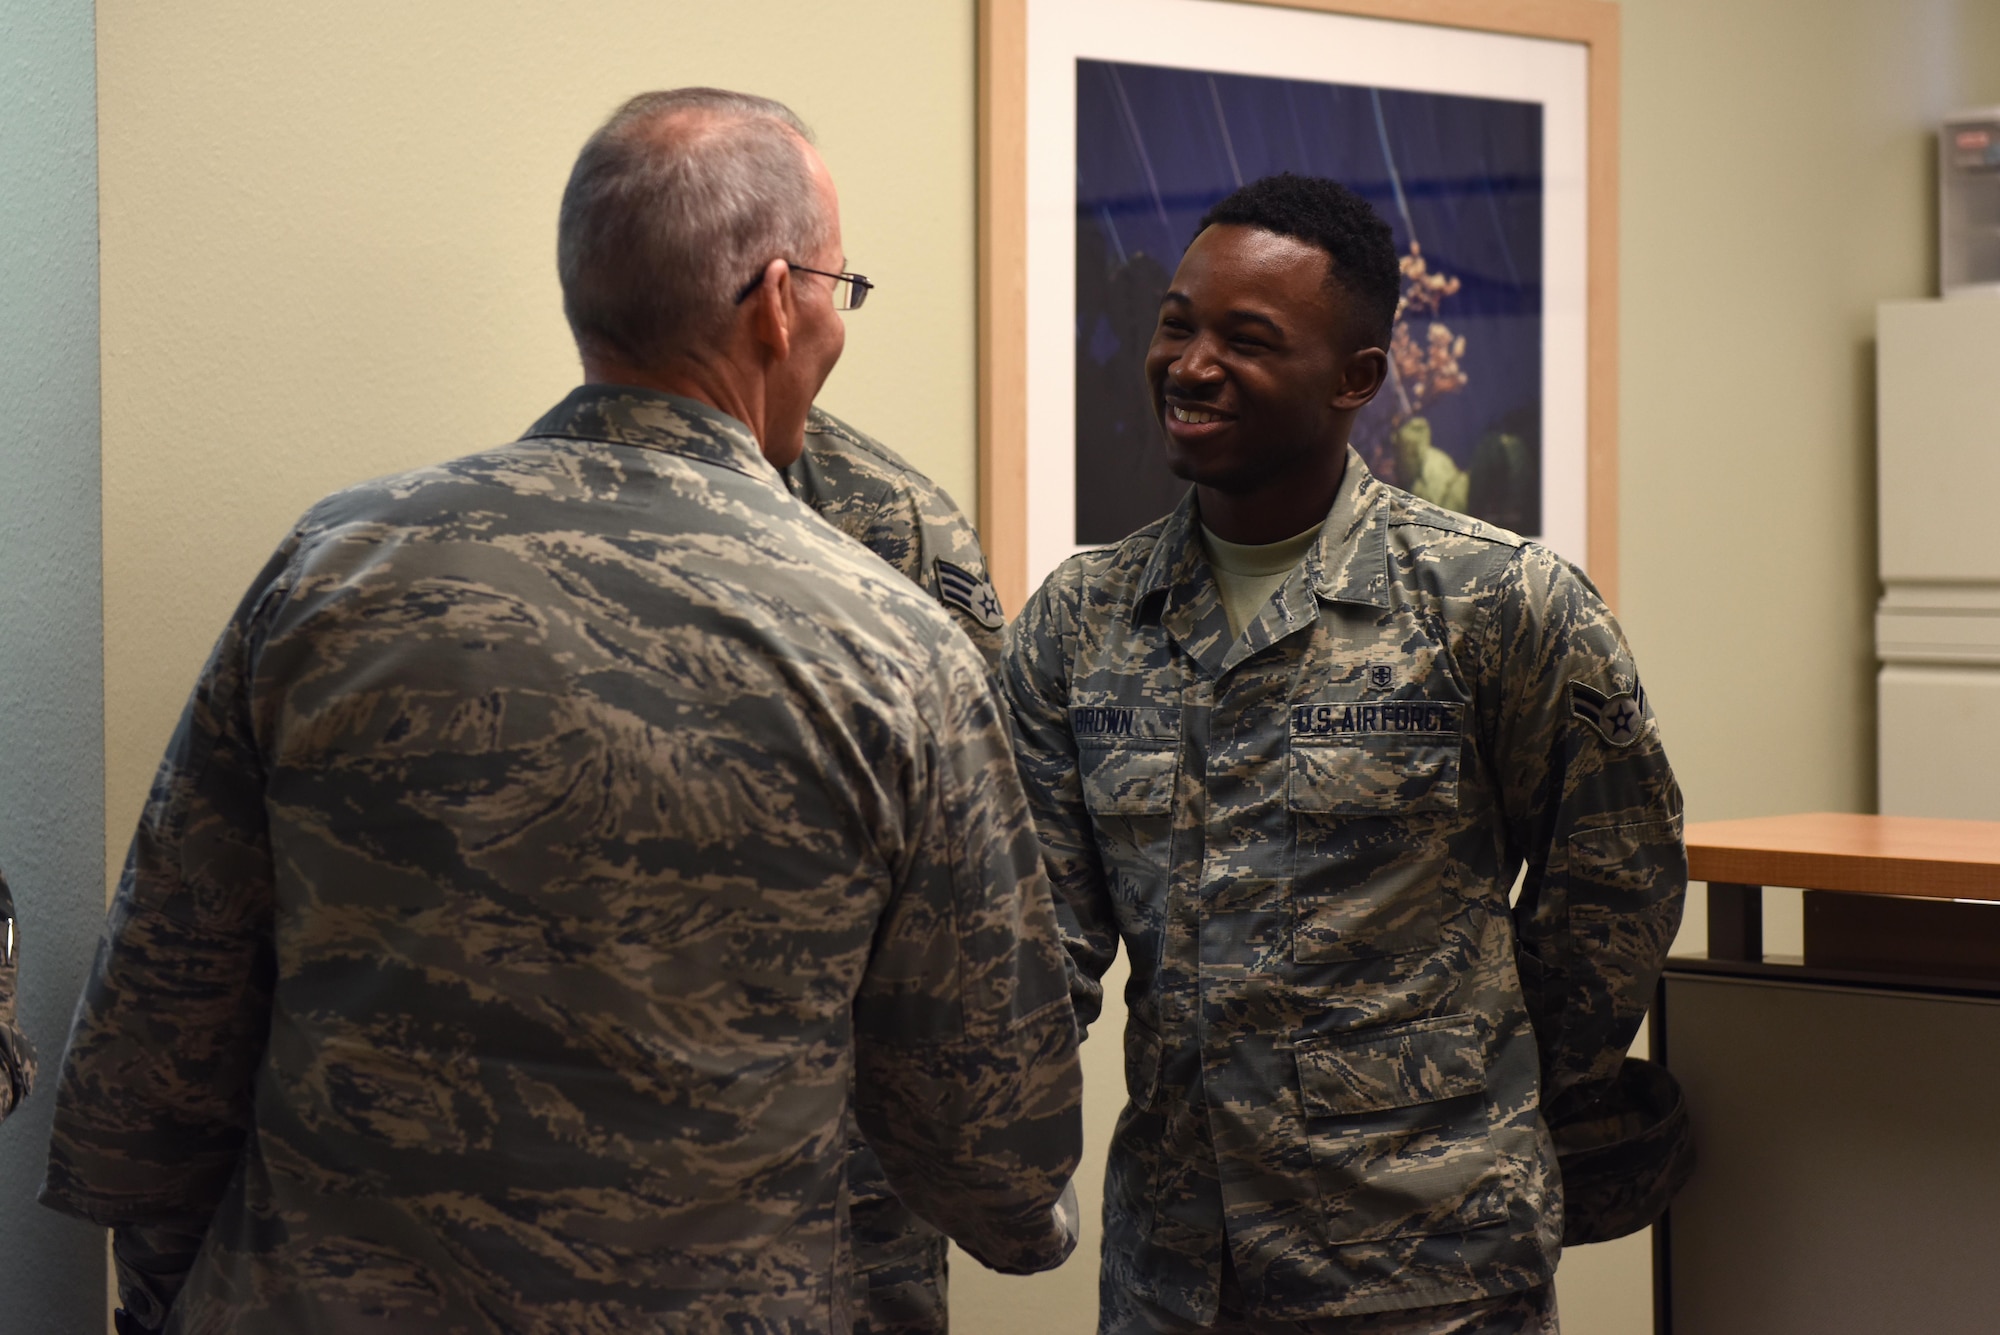 U.S. Air Force Maj. Gen. Bob LaBrutta, 2nd Air Force Commander, shakes hands with Airman 1st Class Jeremy Brown, 17th Medical Operations Squadron biological environmental engineering journeyman, at the Ross Clinic on Goodfellow Air Force Base, Texas, Oct. 6, 2016. During a two-day base tour, LaBrutta visited several buildings around base and met Airmen there. (U.S. Air Force photo by Airman 1st Class Chase Sousa/Released)